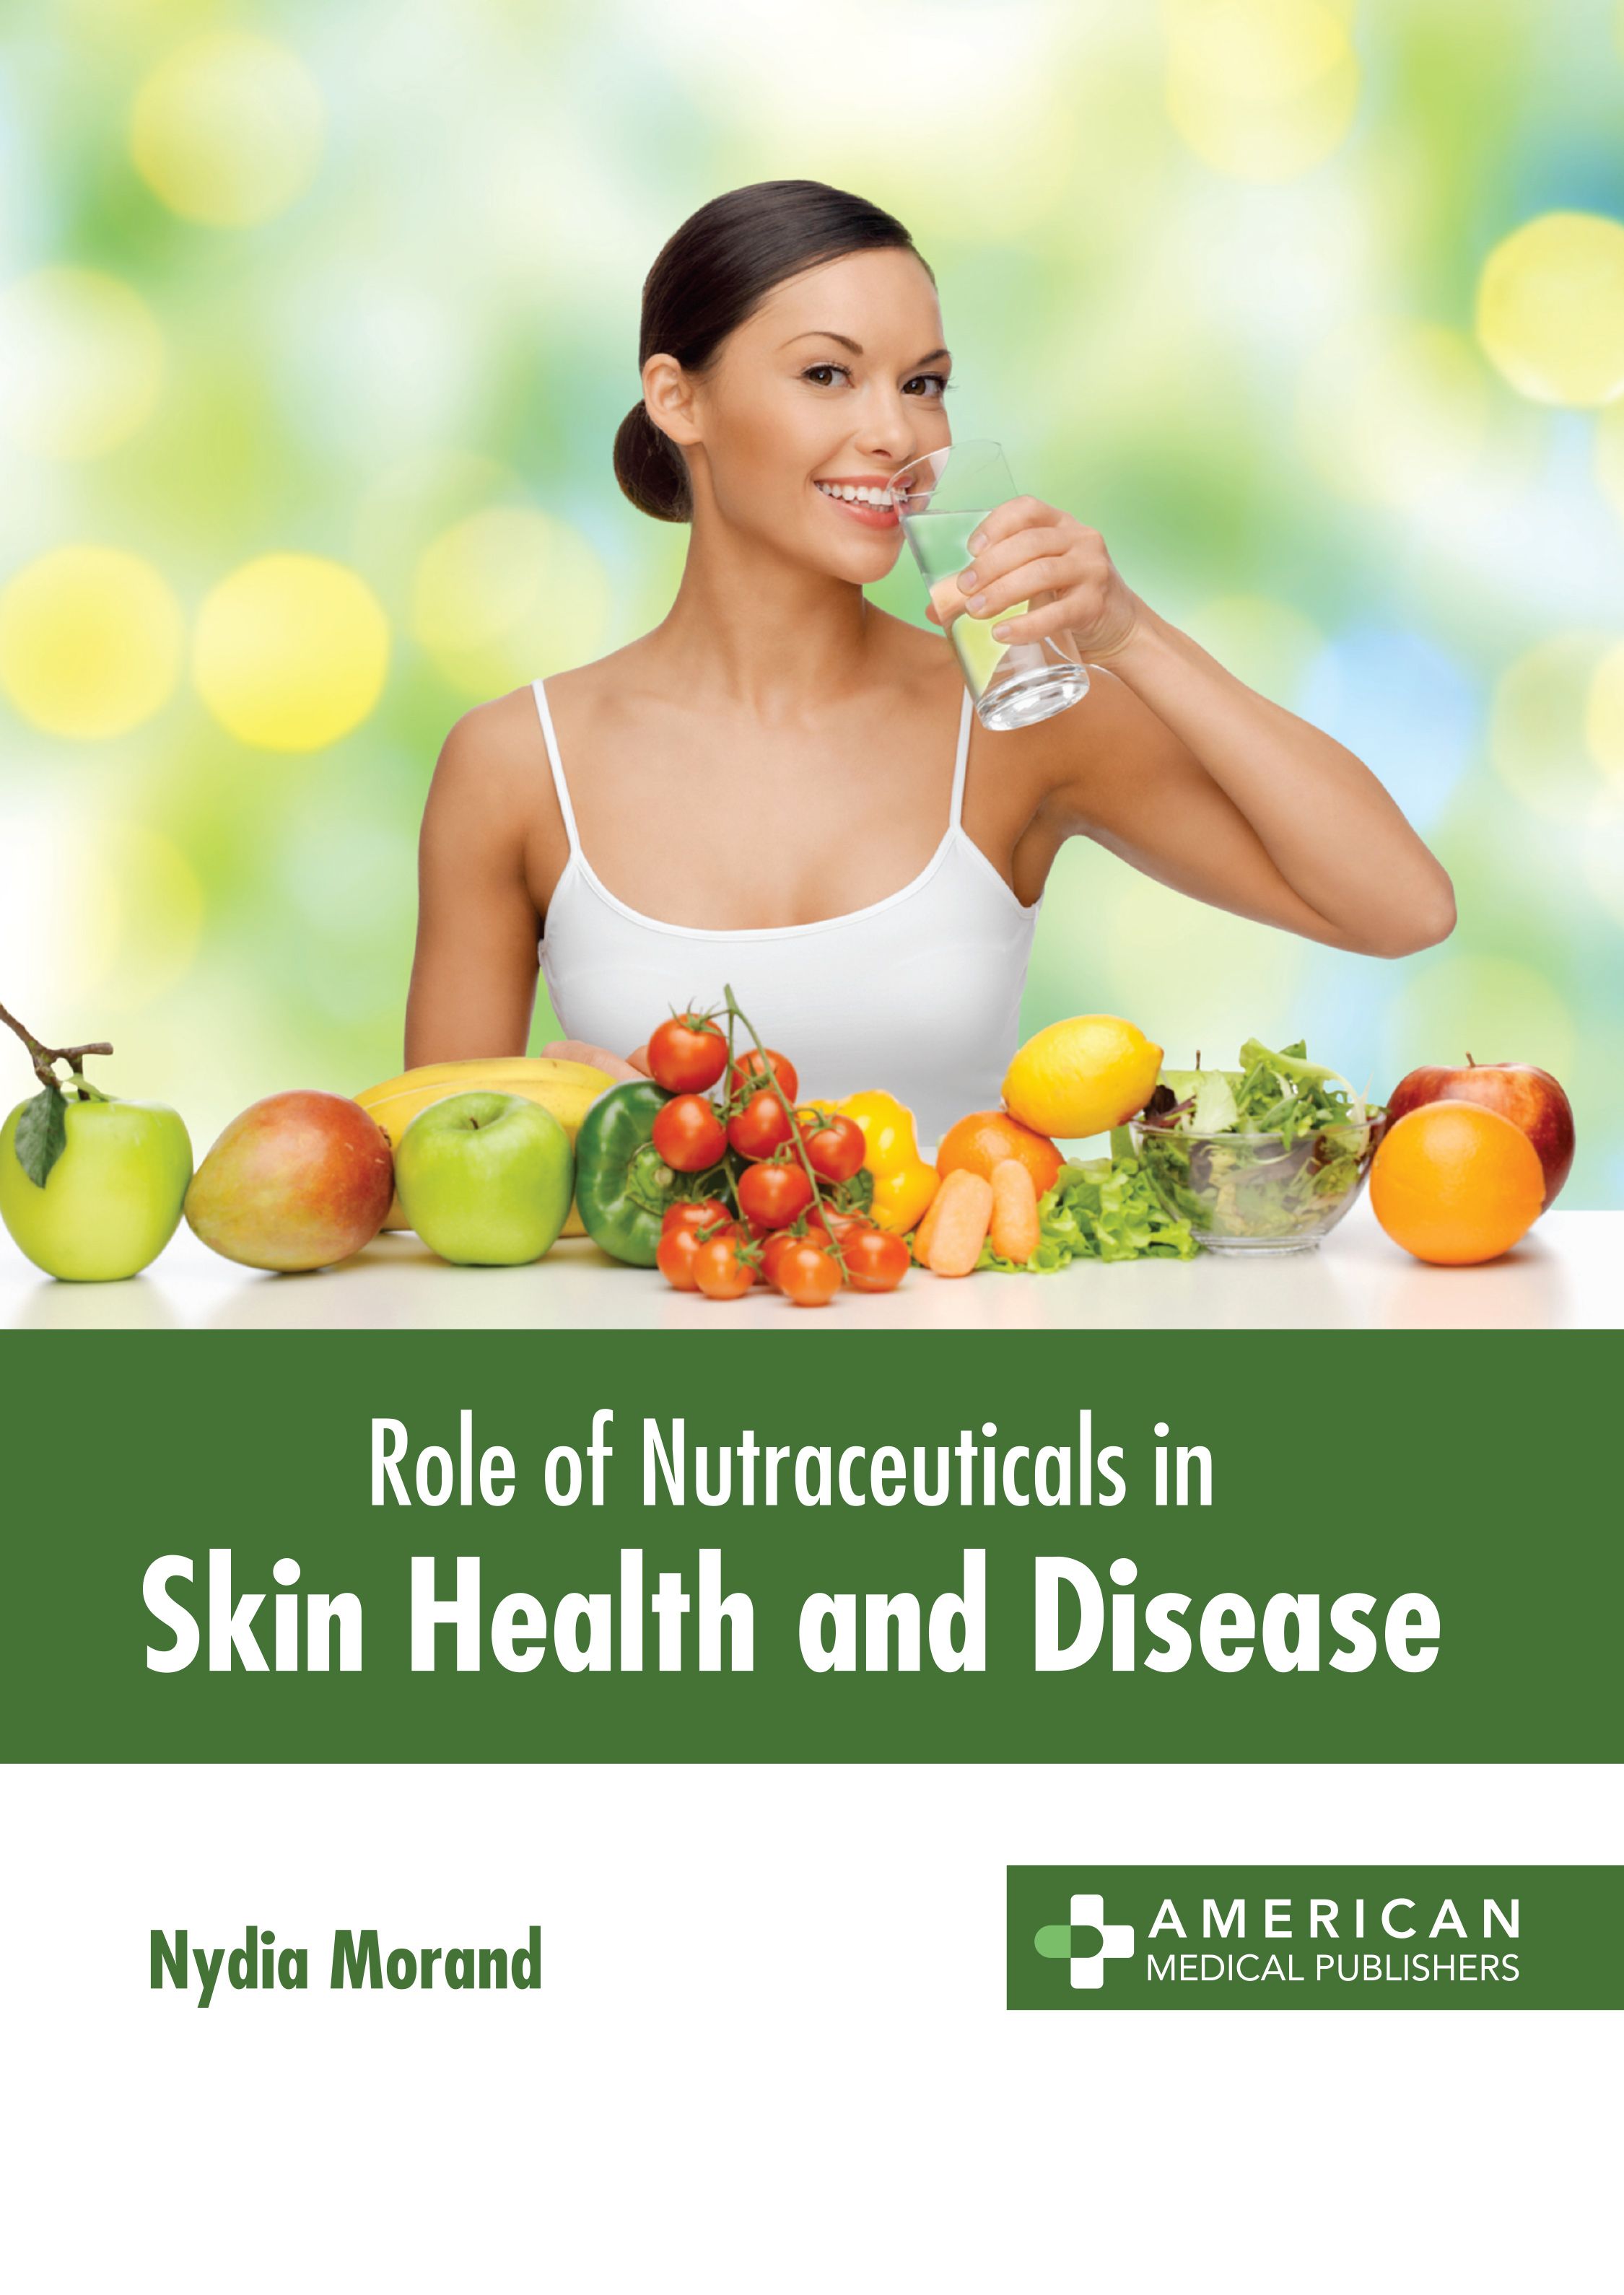 ROLE OF NUTRACEUTICALS IN SKIN HEALTH AND DISEASE